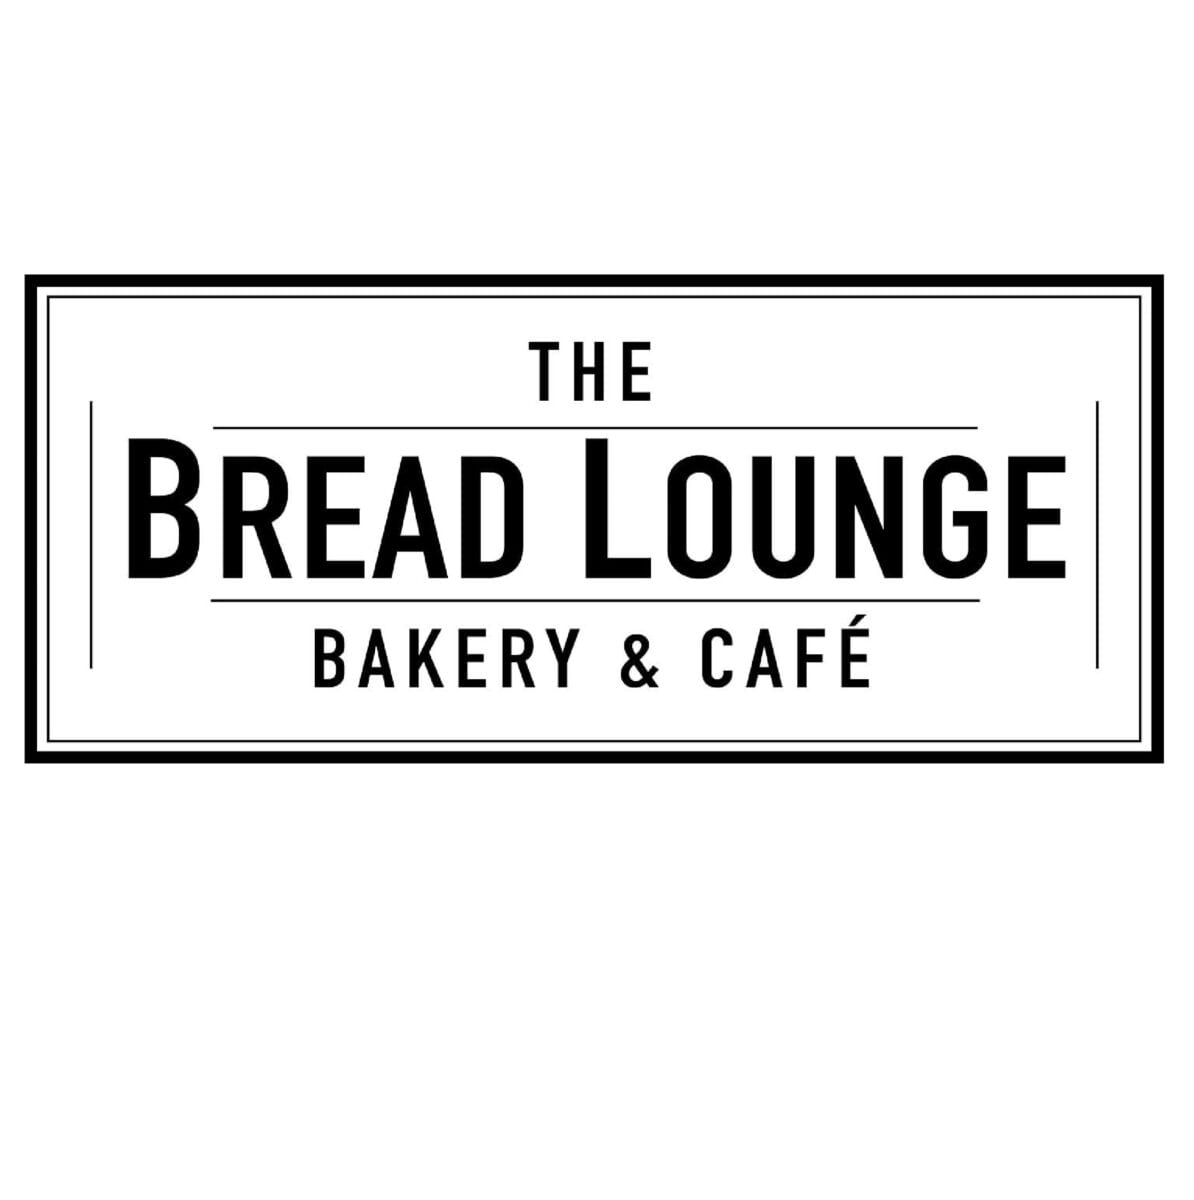 The Bread Lounge